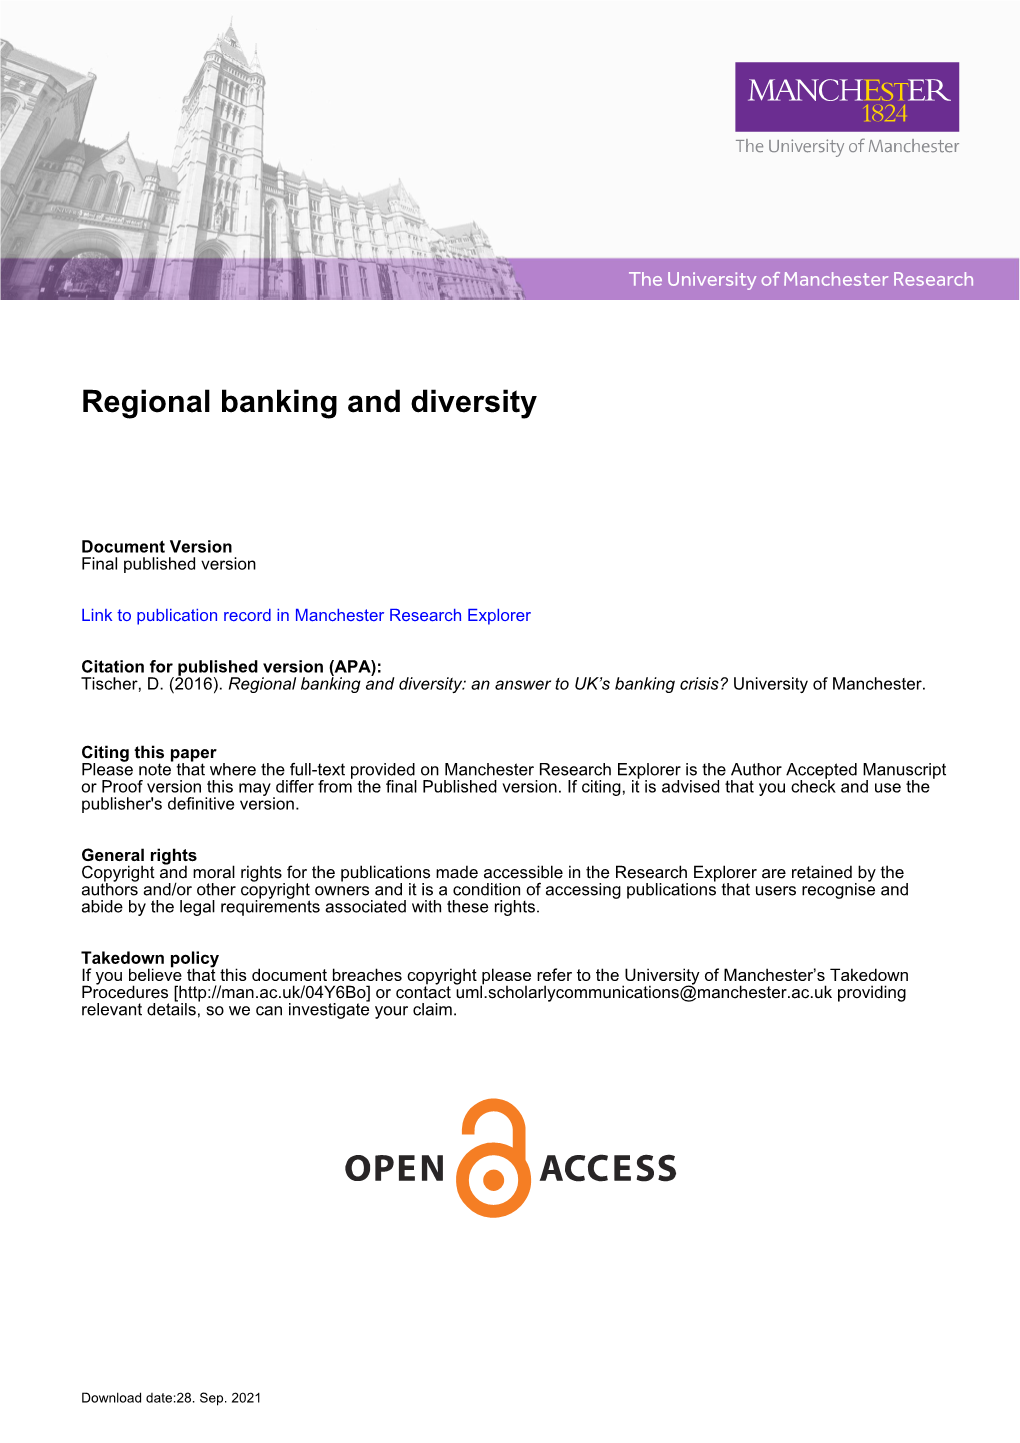 Regional Banking and Diversity